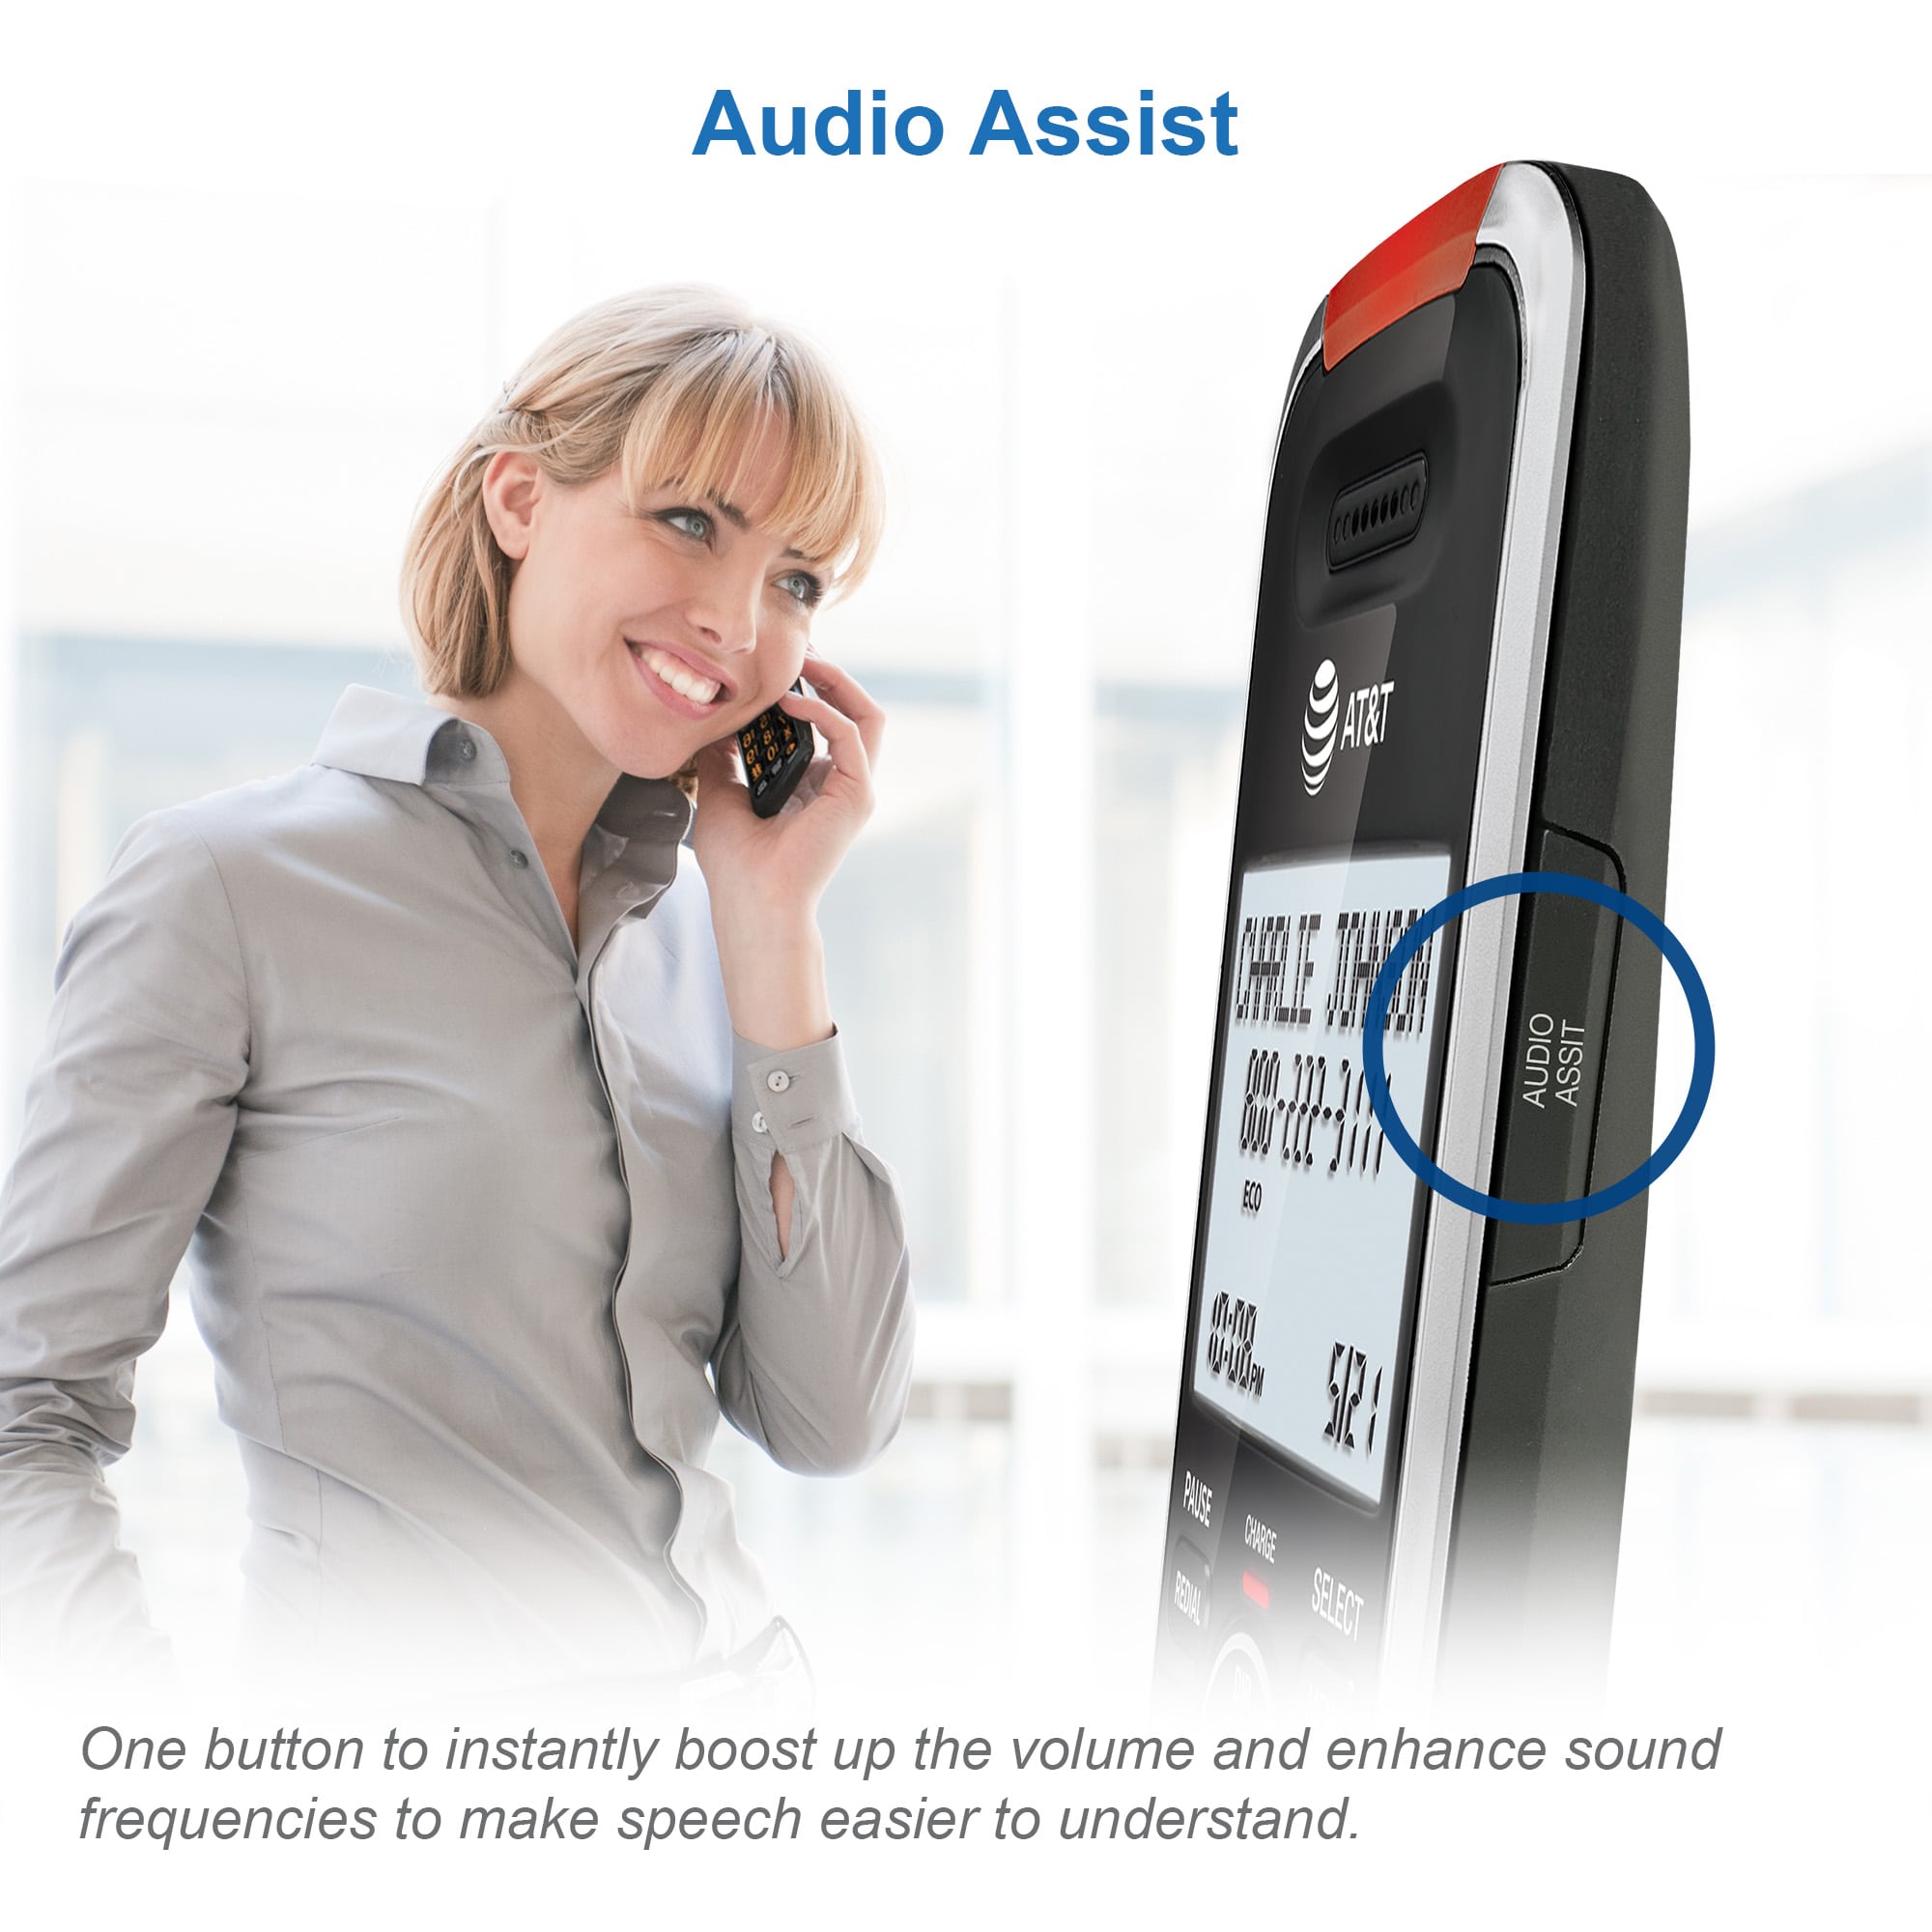 3-Handset Cordless Phone with Unsurpassed Range, Smart Call Blocker and Answering System - view 7